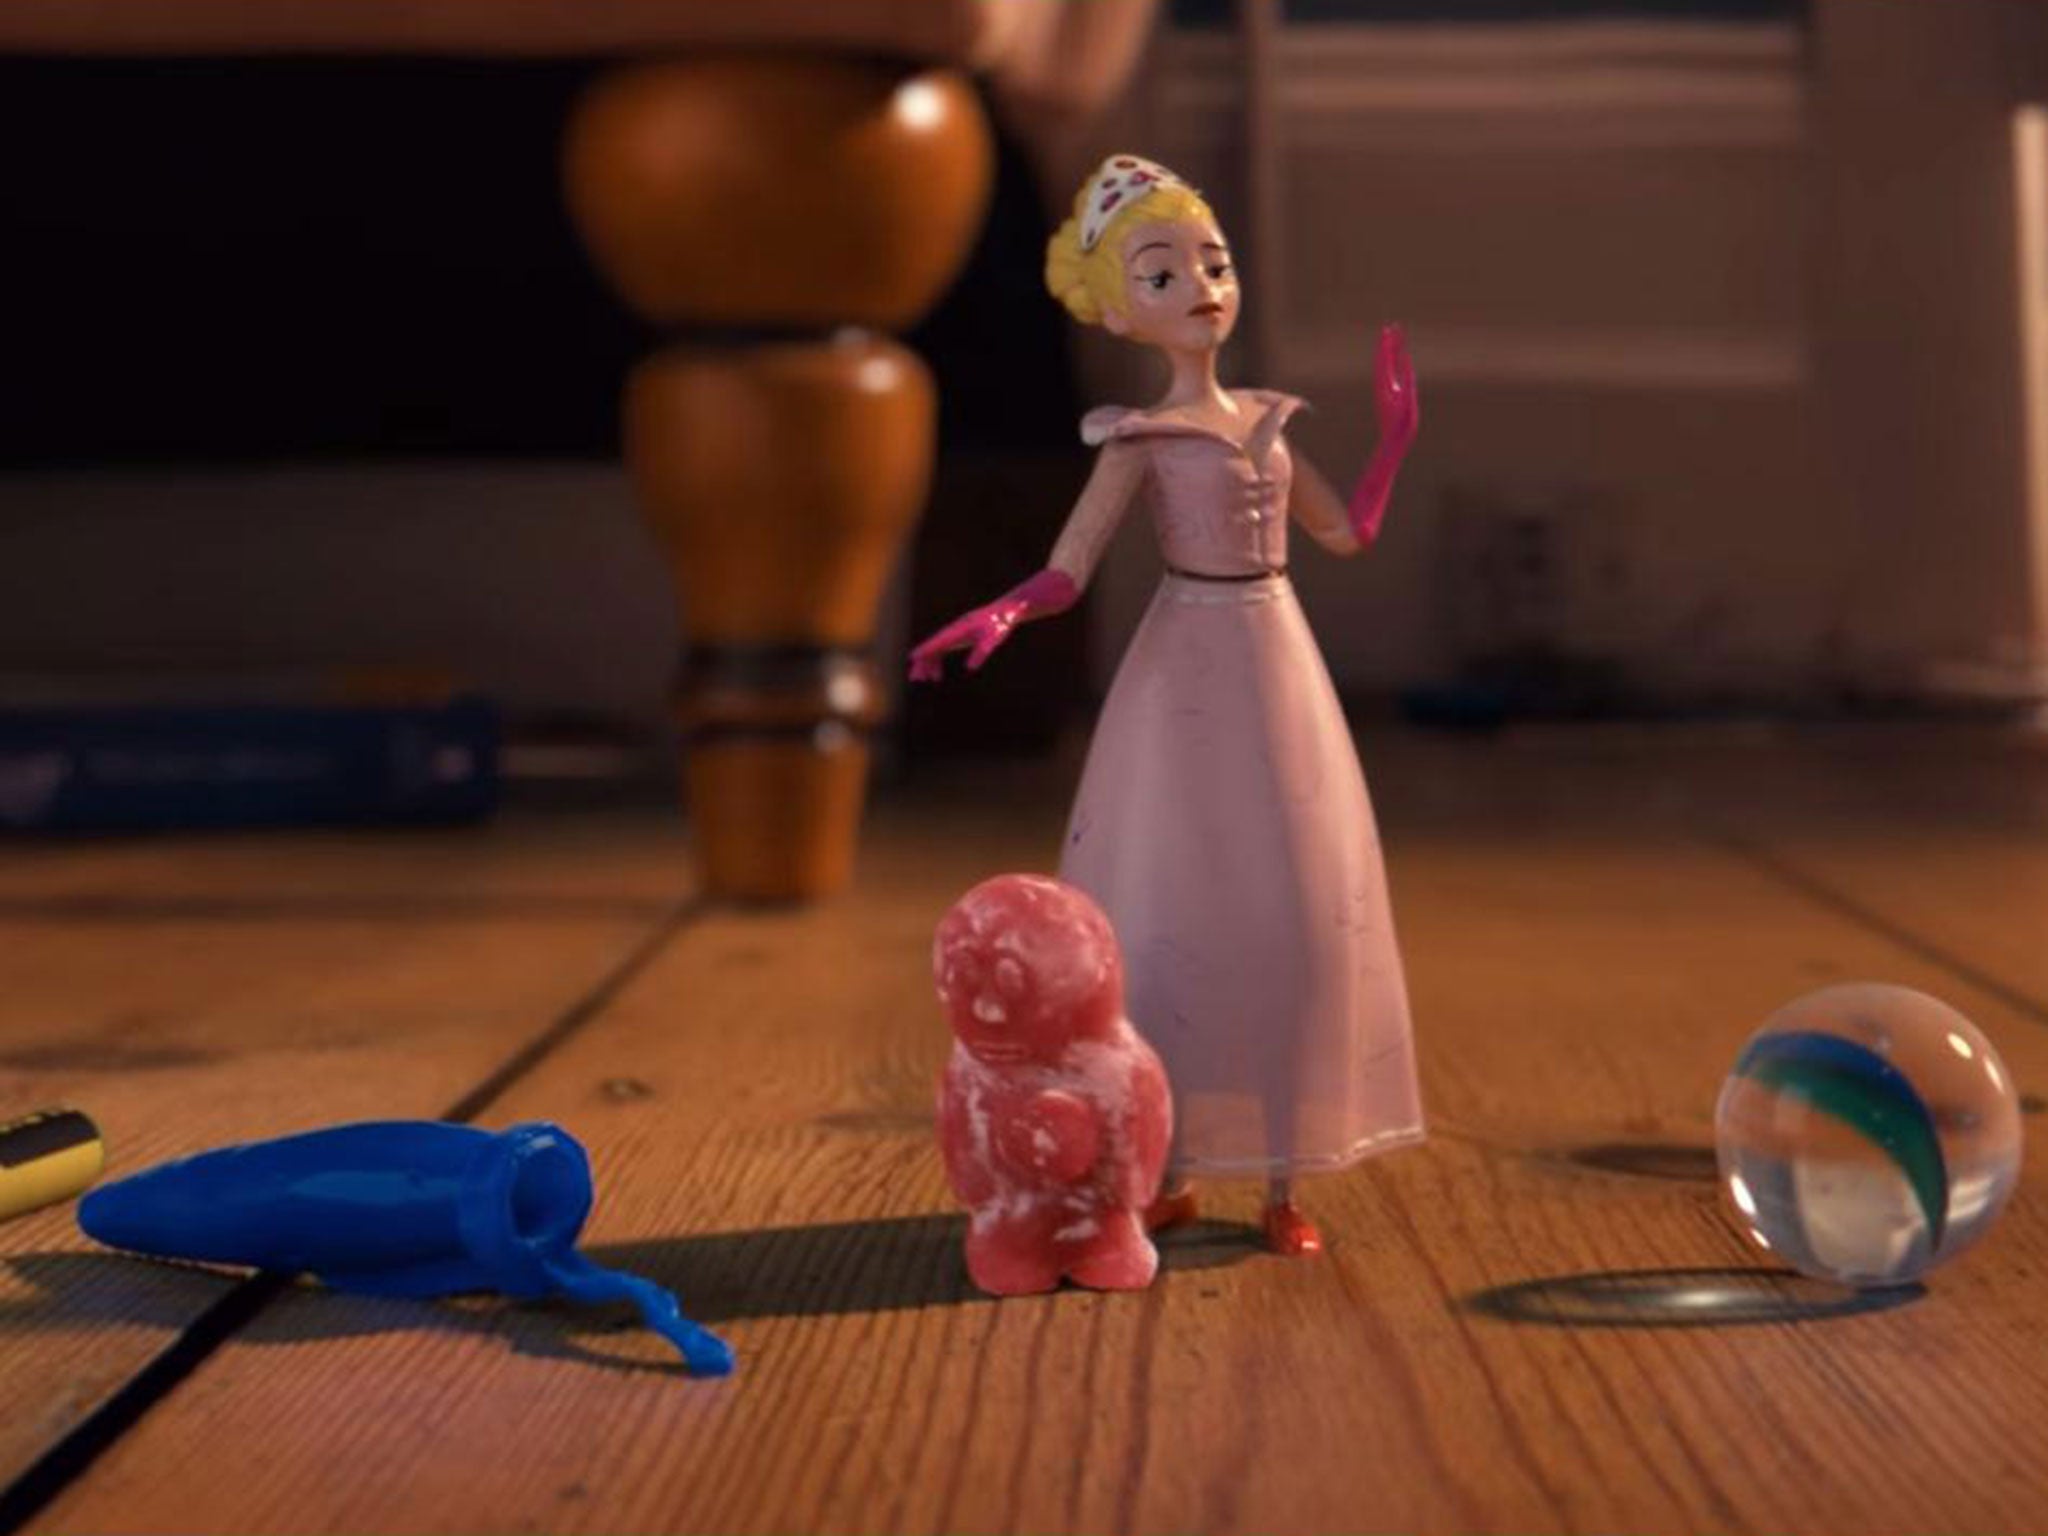 A still from The Chokeables